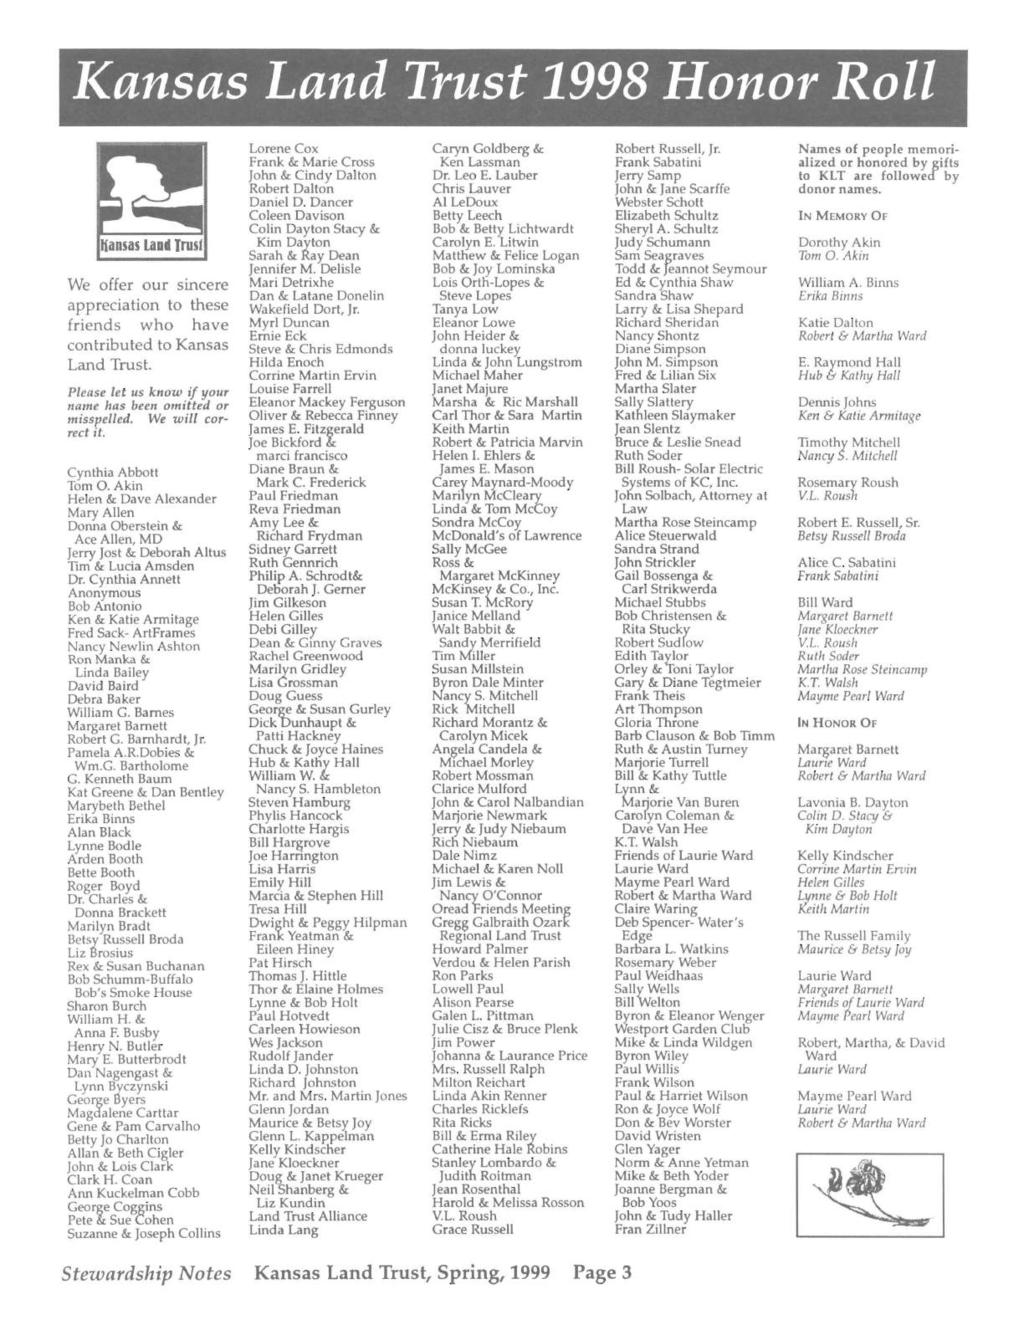 Kansas Land Trust 1998 Honor Roll We offer our sincere appreciation to these friends who have contributed to Kansas Land Trust. Please let us know if your name has been omitted or misspelled.